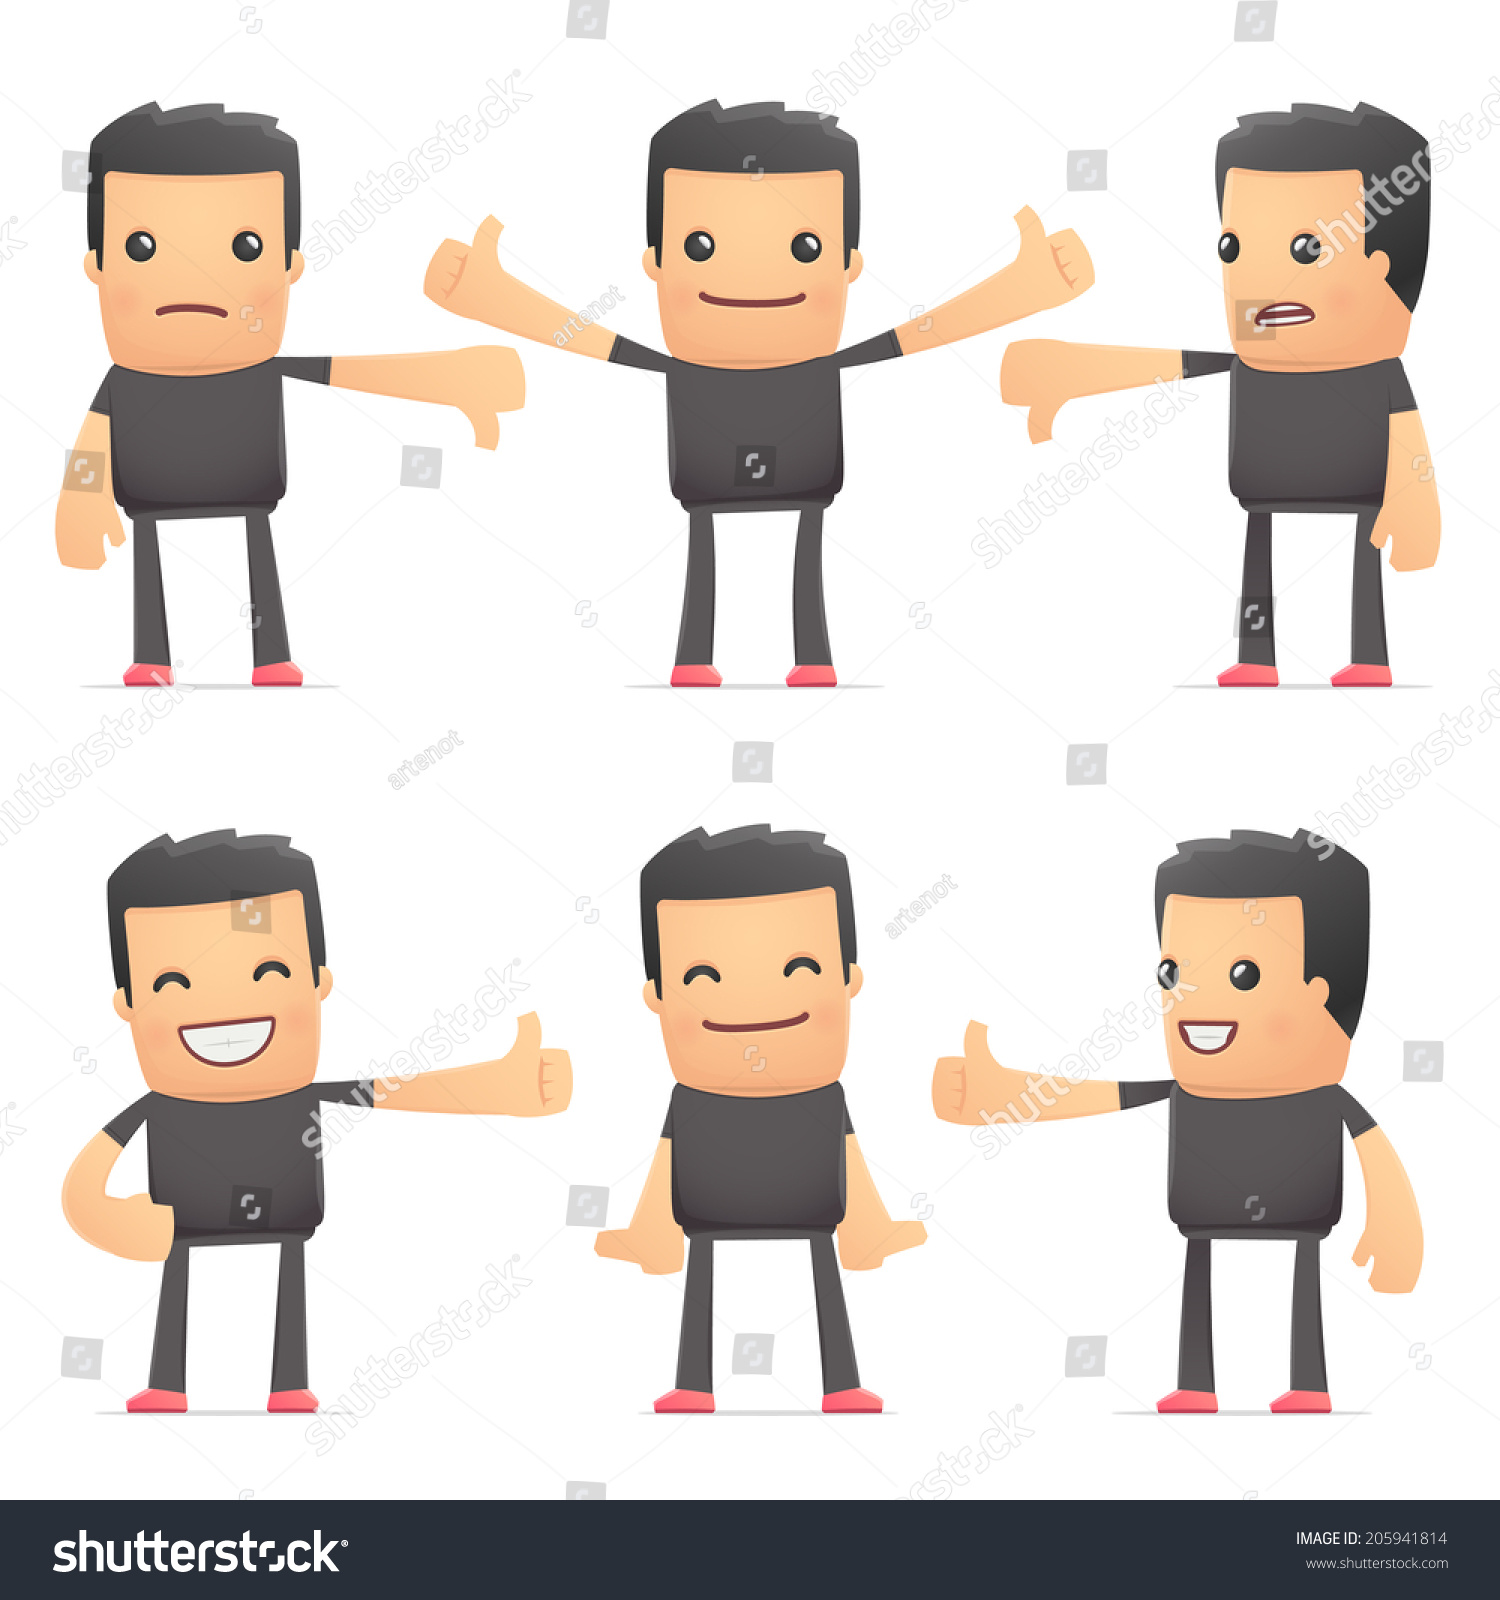 SVG of set of bad guy character in different interactive  poses svg